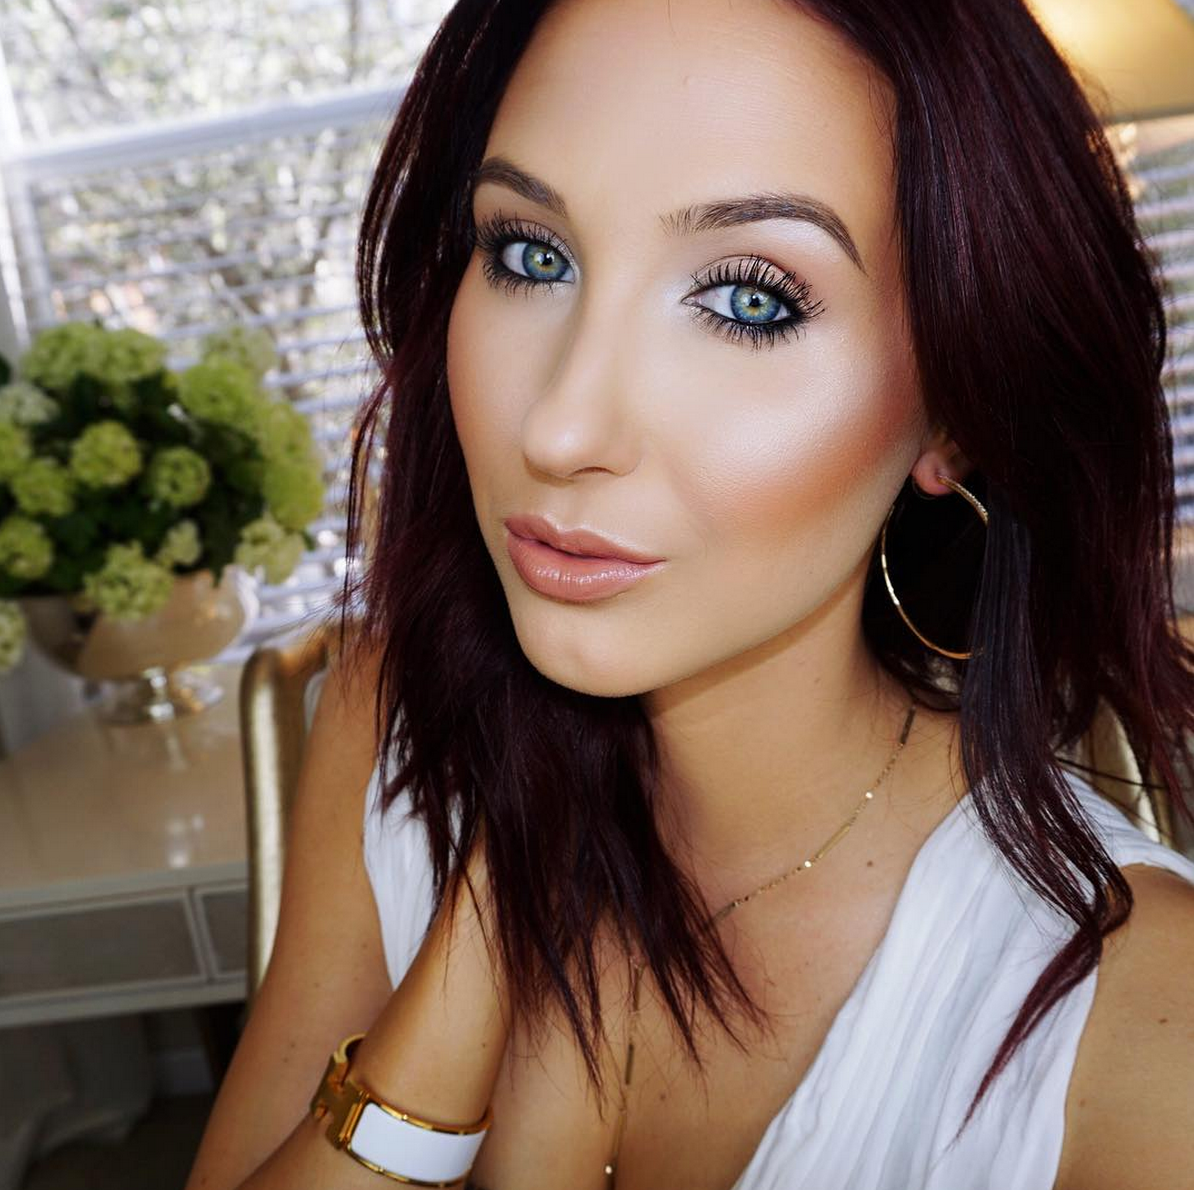 Oh No! It Looks Like Jaclyn Hill's New Makeup Palette Won't Be Released  After All